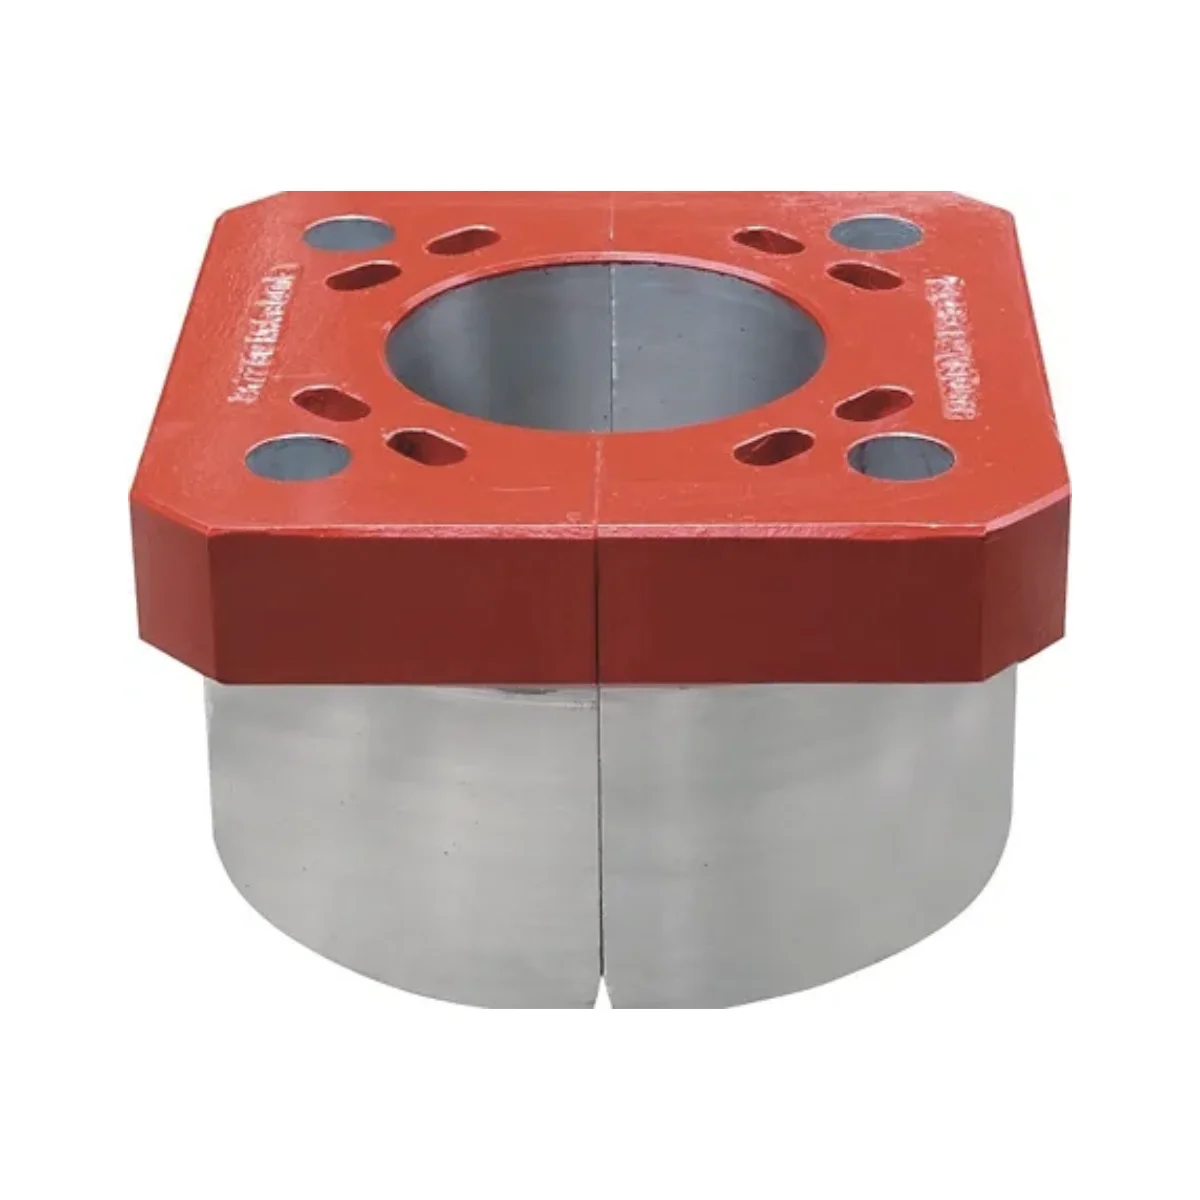 This Master Bushings for different rotary tables in the oilfield handling tools industry. These bushings are essential components for drilling operations, connecting the rotary table to the drill string. Available equivalents include NOV MPCH, Wirth, DenCon, Varco, Oilwell, Emsco, HMH, National, Forum, and BVm, all designed for 27.5-inch rotary tables. Additionally, there are master bushings tailored for specific brands and sizes, such as Varco 49.5-inch and DenCon 49.5-inch rotary tables. These bushings ensure smooth and efficient drilling processes by providing stable connections and support.